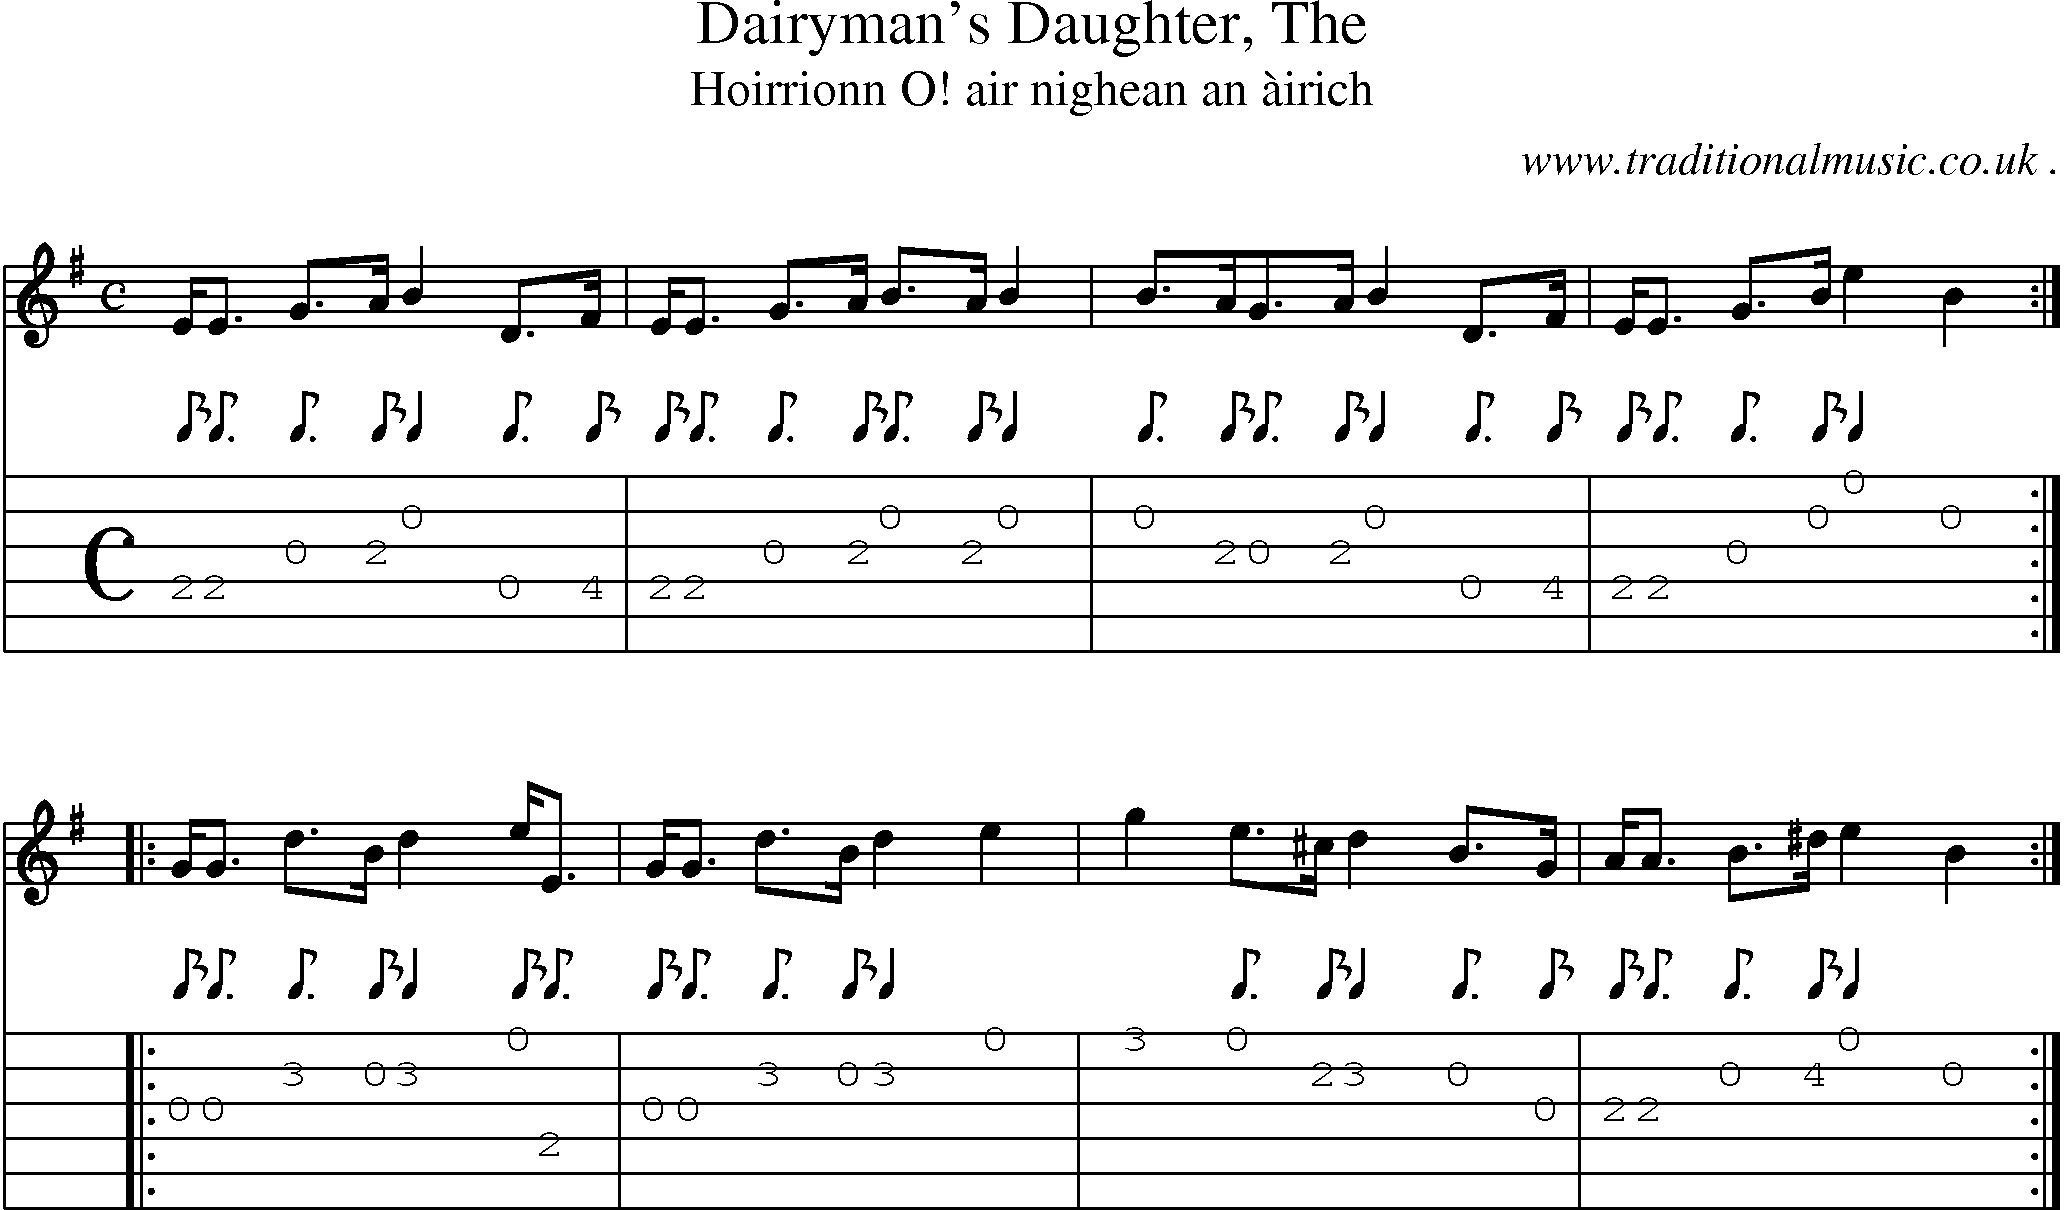 Sheet-music  score, Chords and Guitar Tabs for Dairymans Daughter The